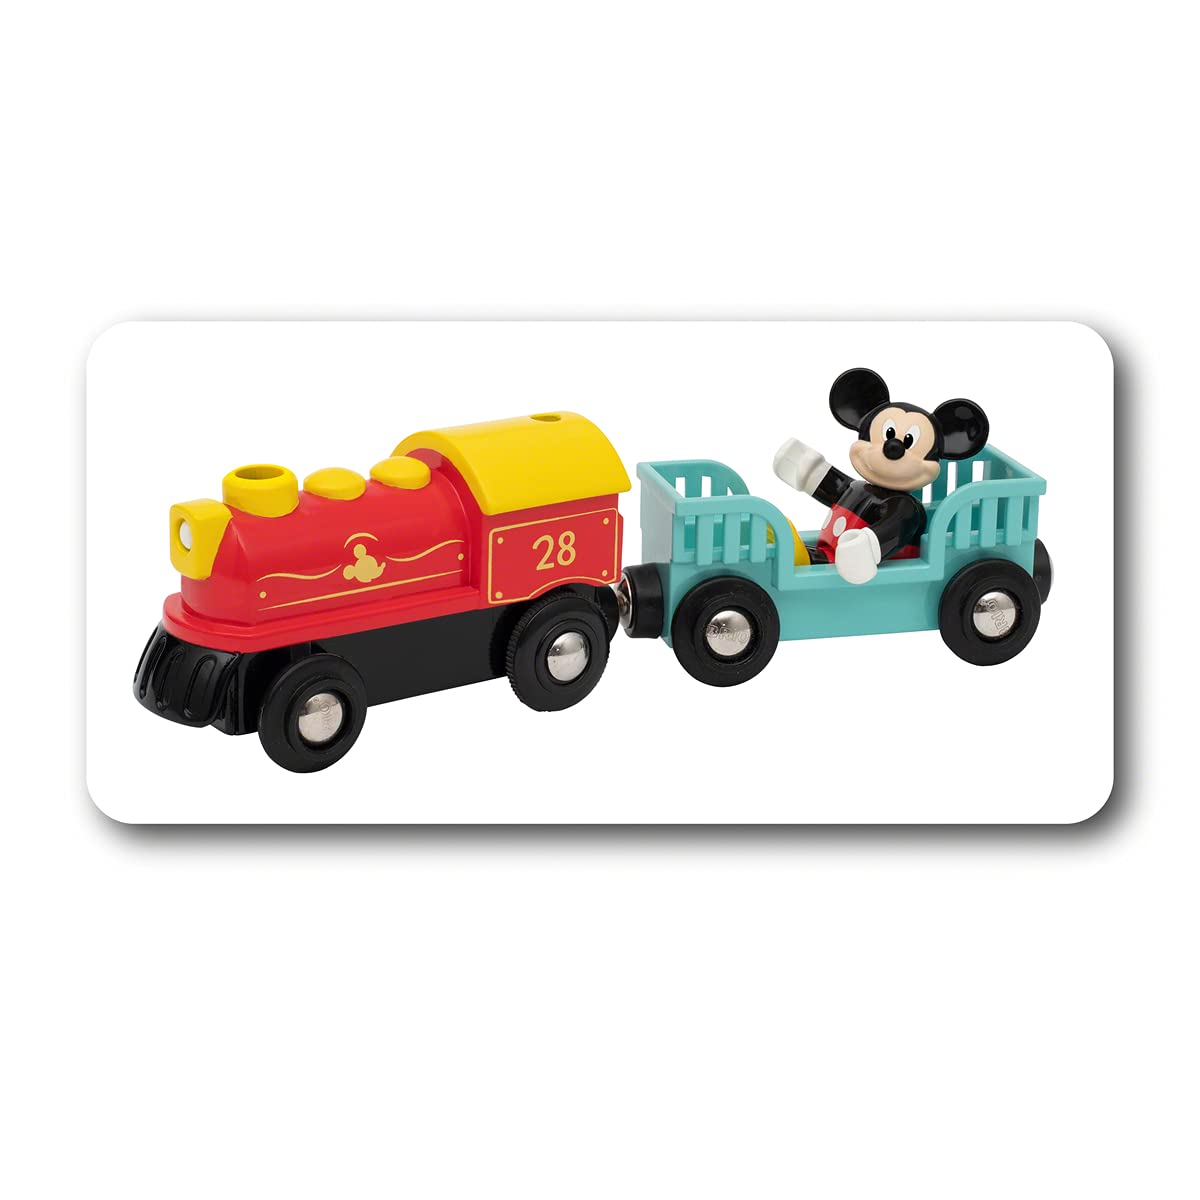 BRIO 32292 Disney Mickey's Deluxe Wooden Railway Set | Wooden Toy Train Set for Kids Age 3 and Up